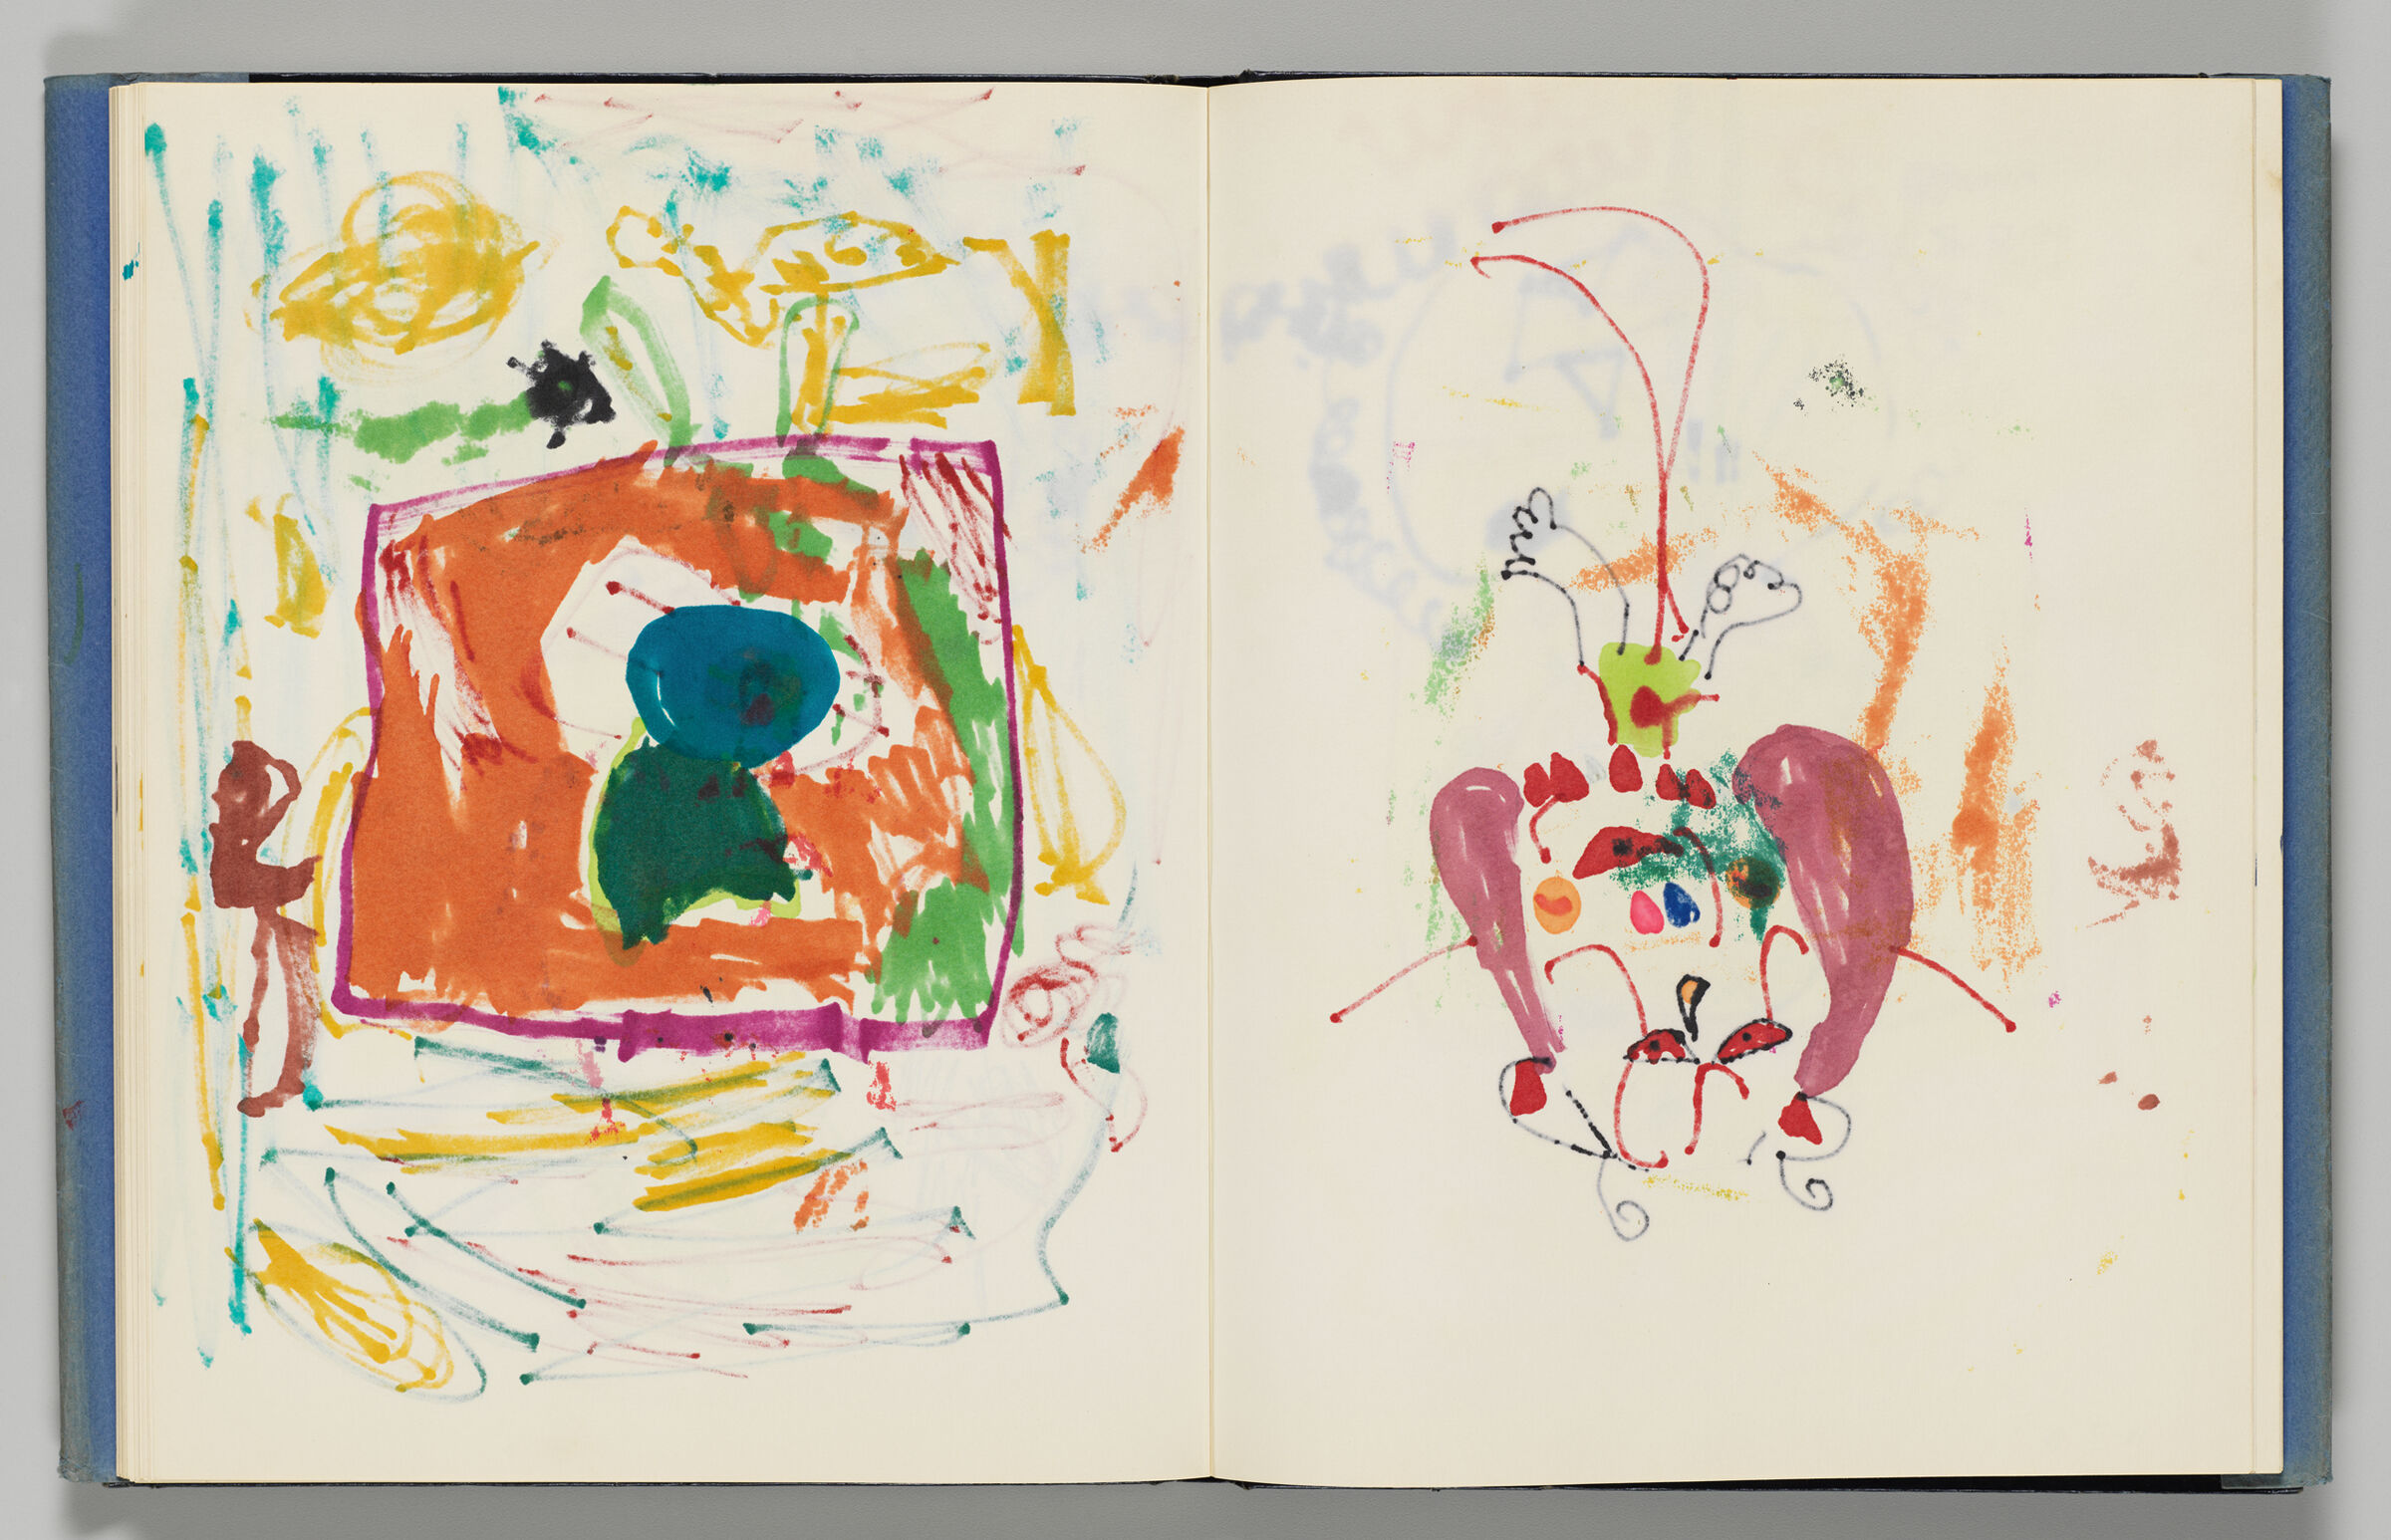 Untitled (Bleed-Through Of Previous Page And Color Transfer, Left Page); Untitled (Bleed-Through Of Following Page And Color Transfer, Right Page)